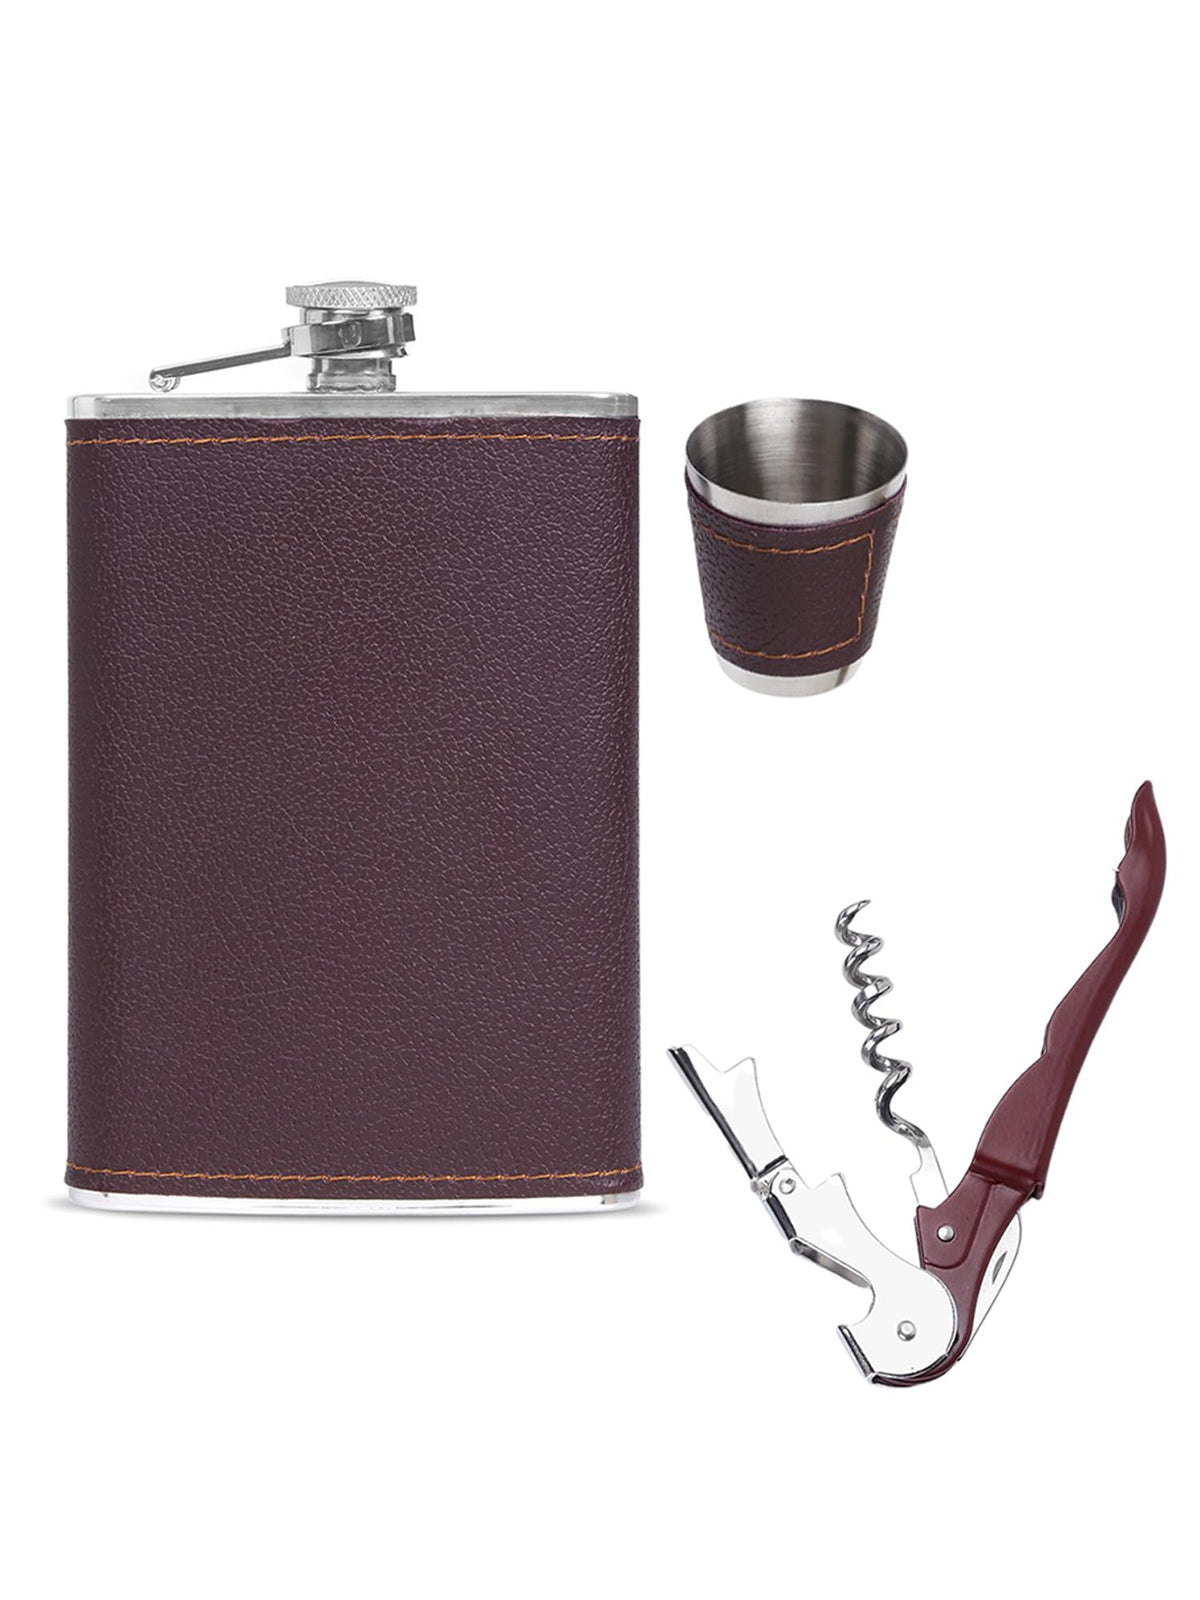 Yellow Chimes Exquisite Men Gifiting Set Hip Flask Gift Set Cork Opener with Brown Leather Cover,Hip Flask for Liquor for Men in a Gift Box